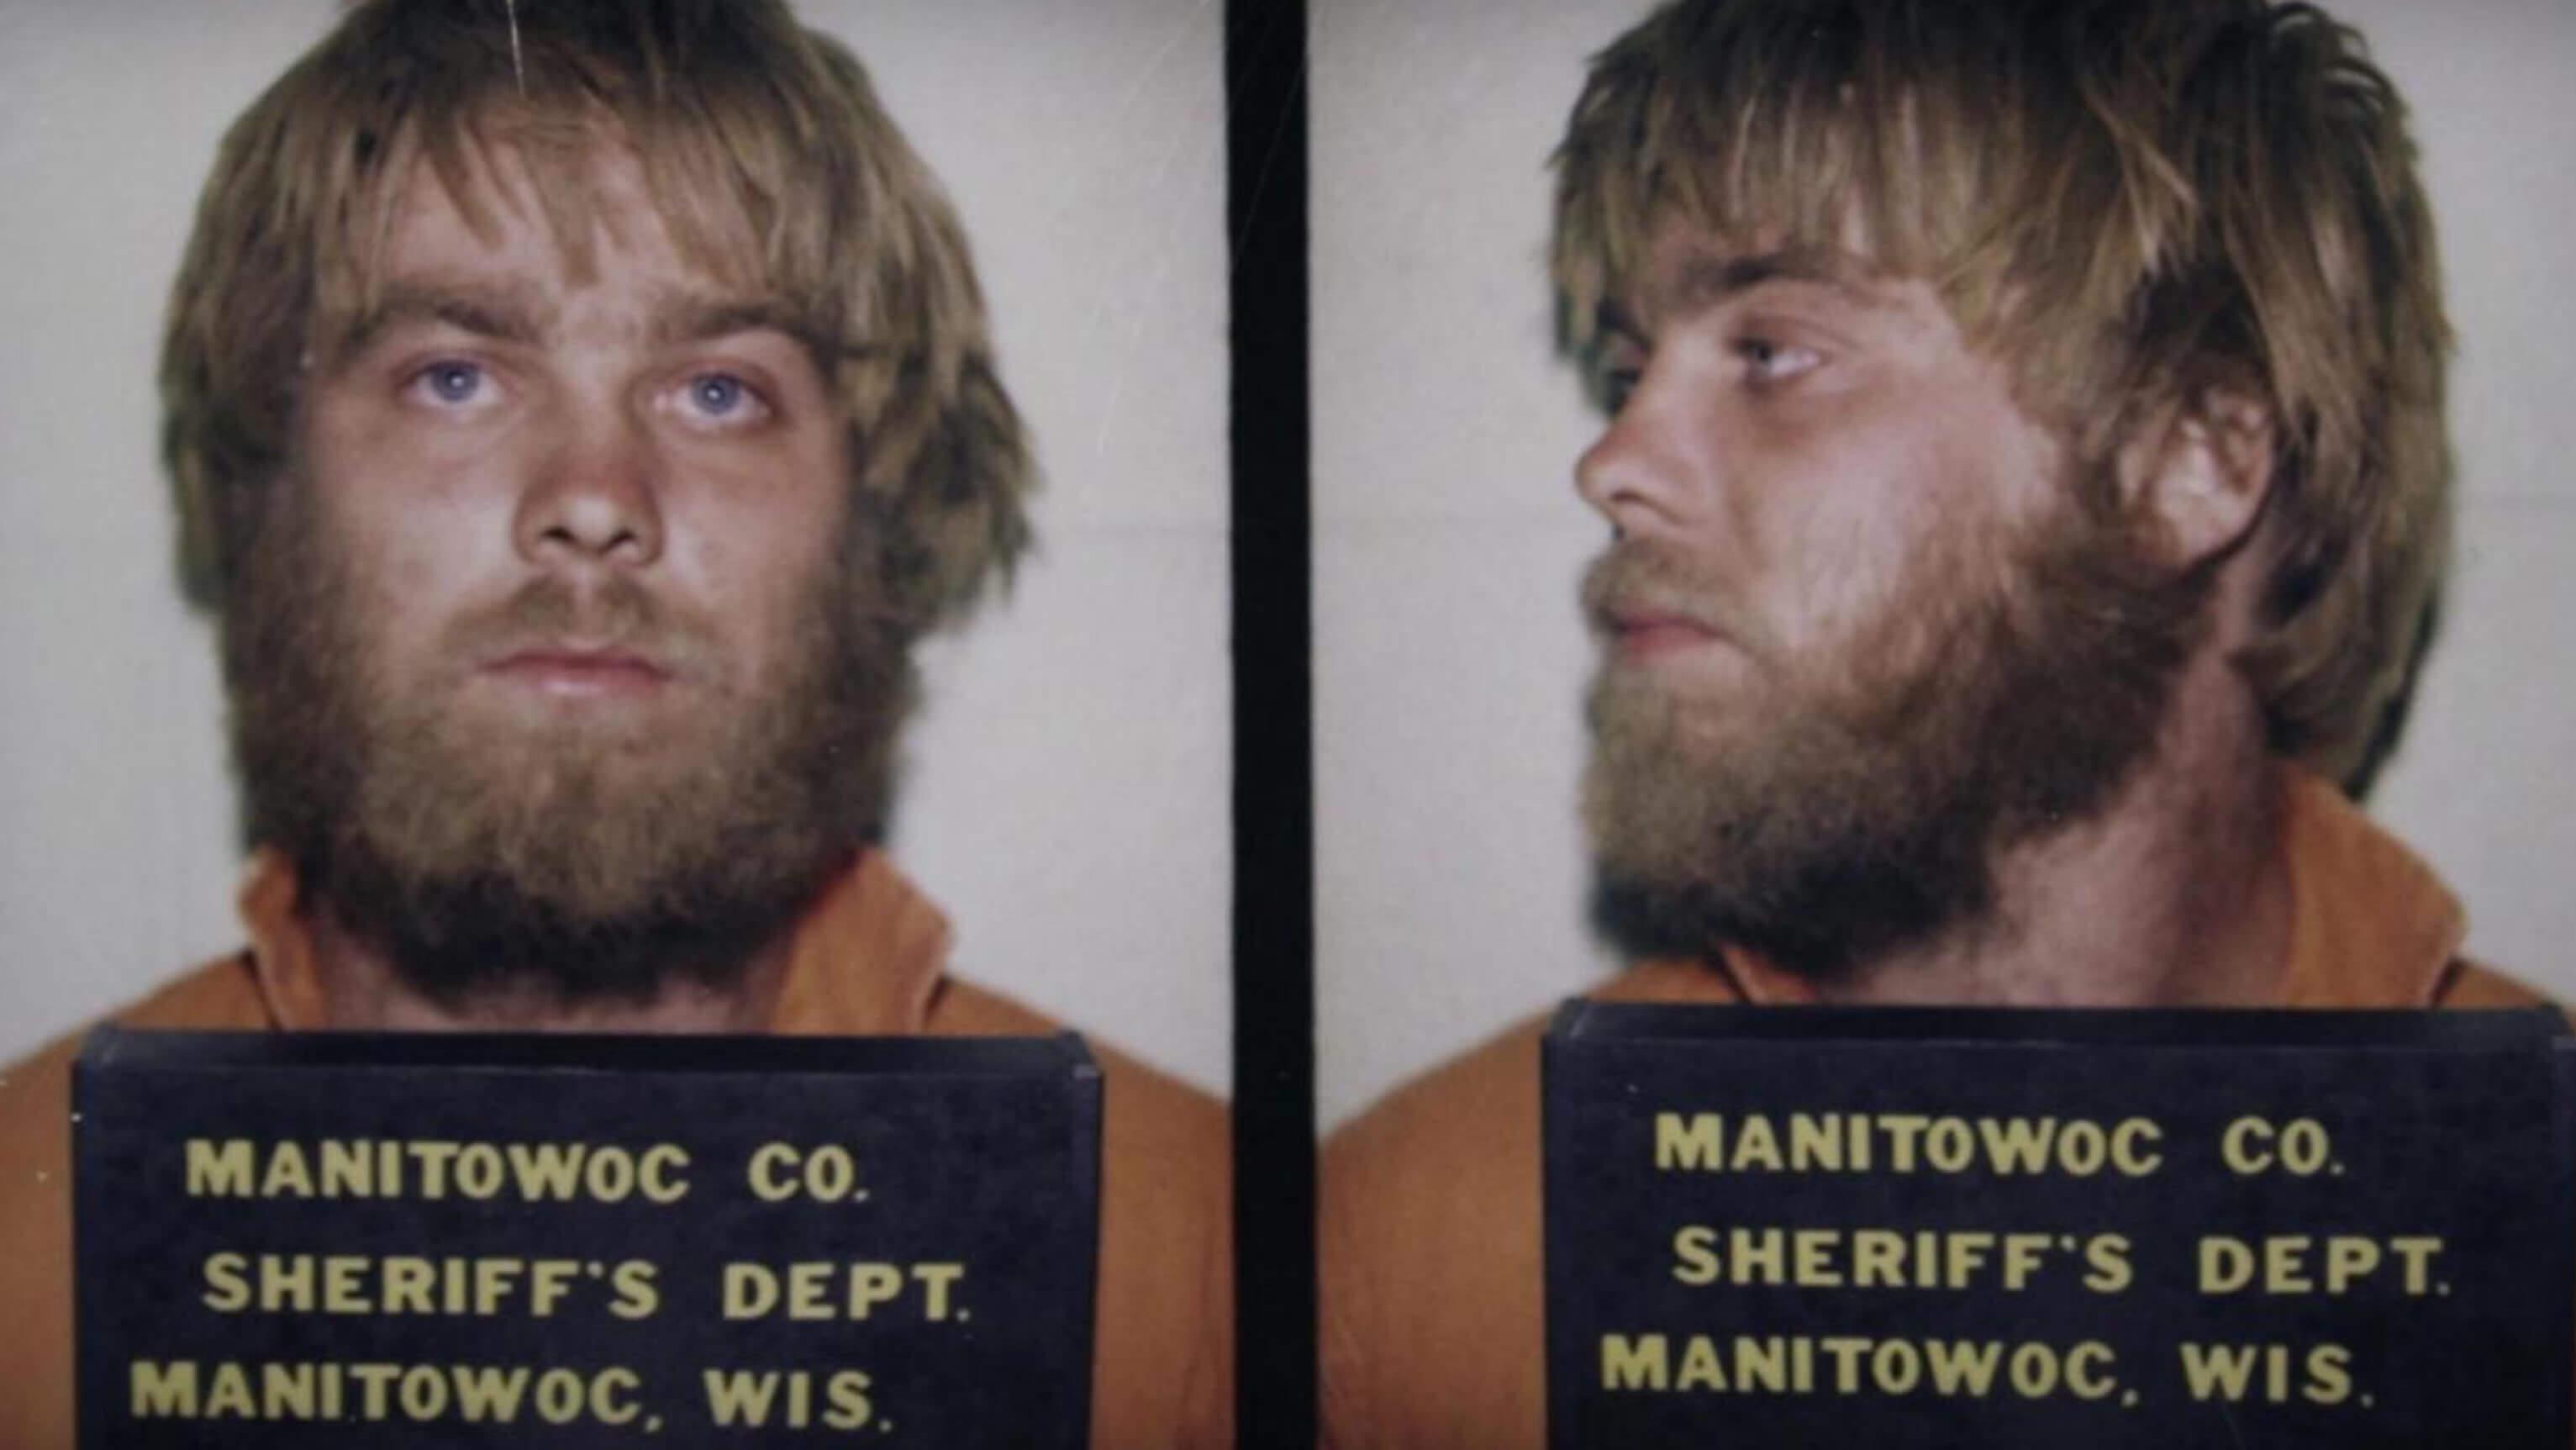 WHAT FACTS DID NETFLIX’S “MAKING A MURDERER” LEAVE OUT?